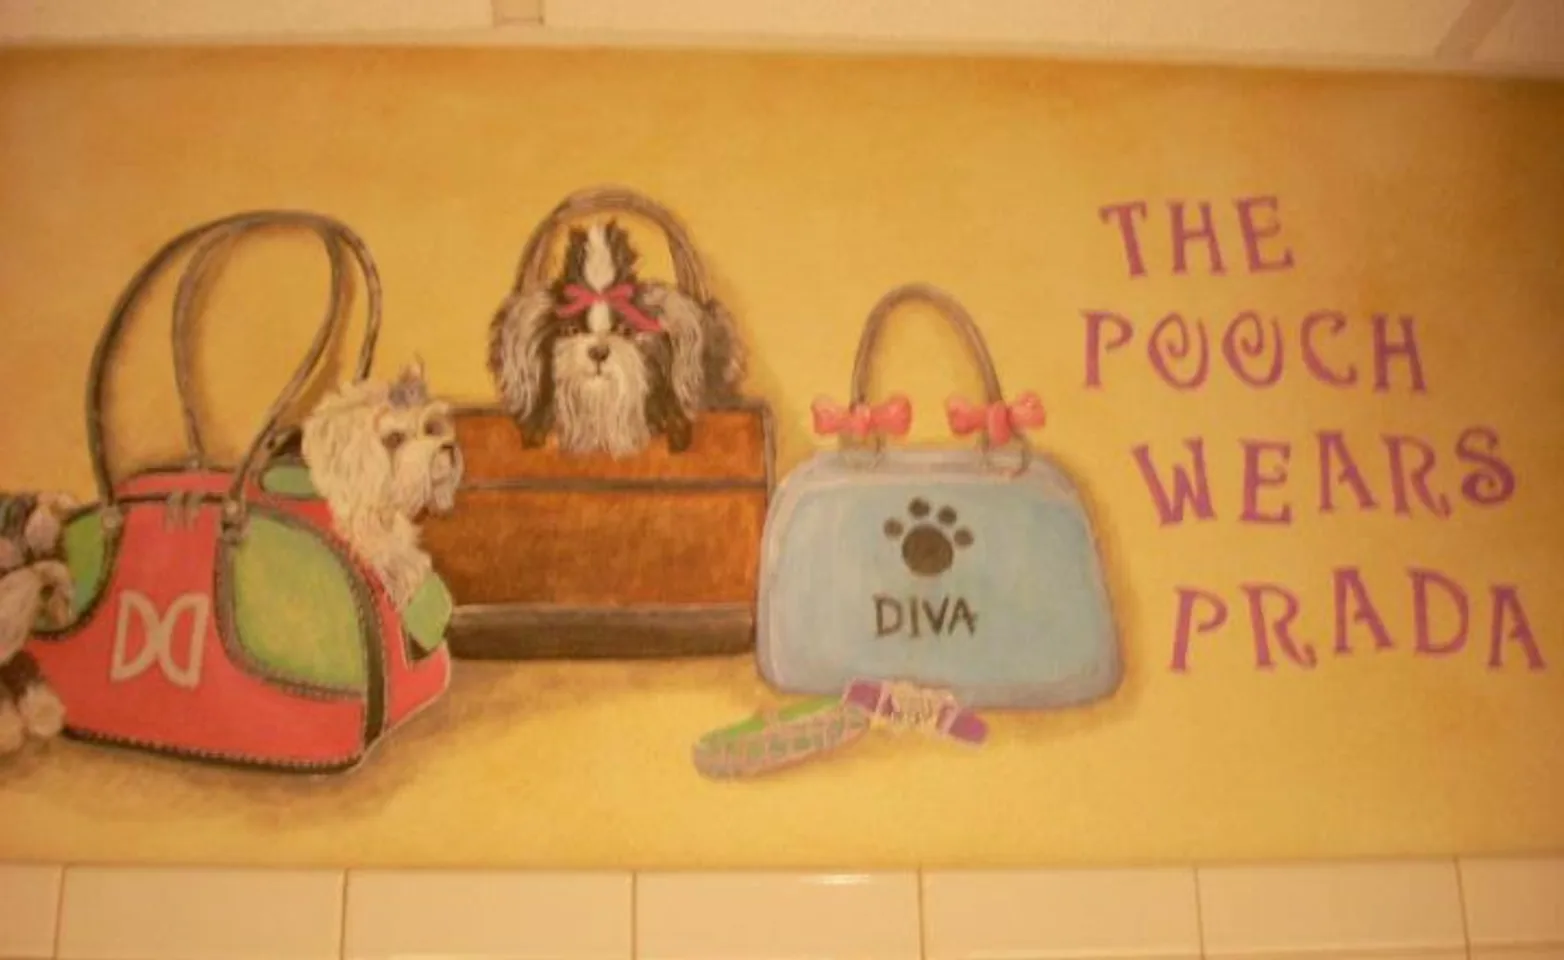 A painted mural of three small dogs sitting inside of three purses with the writing "THE POOCH WEARS PRADA" next to it